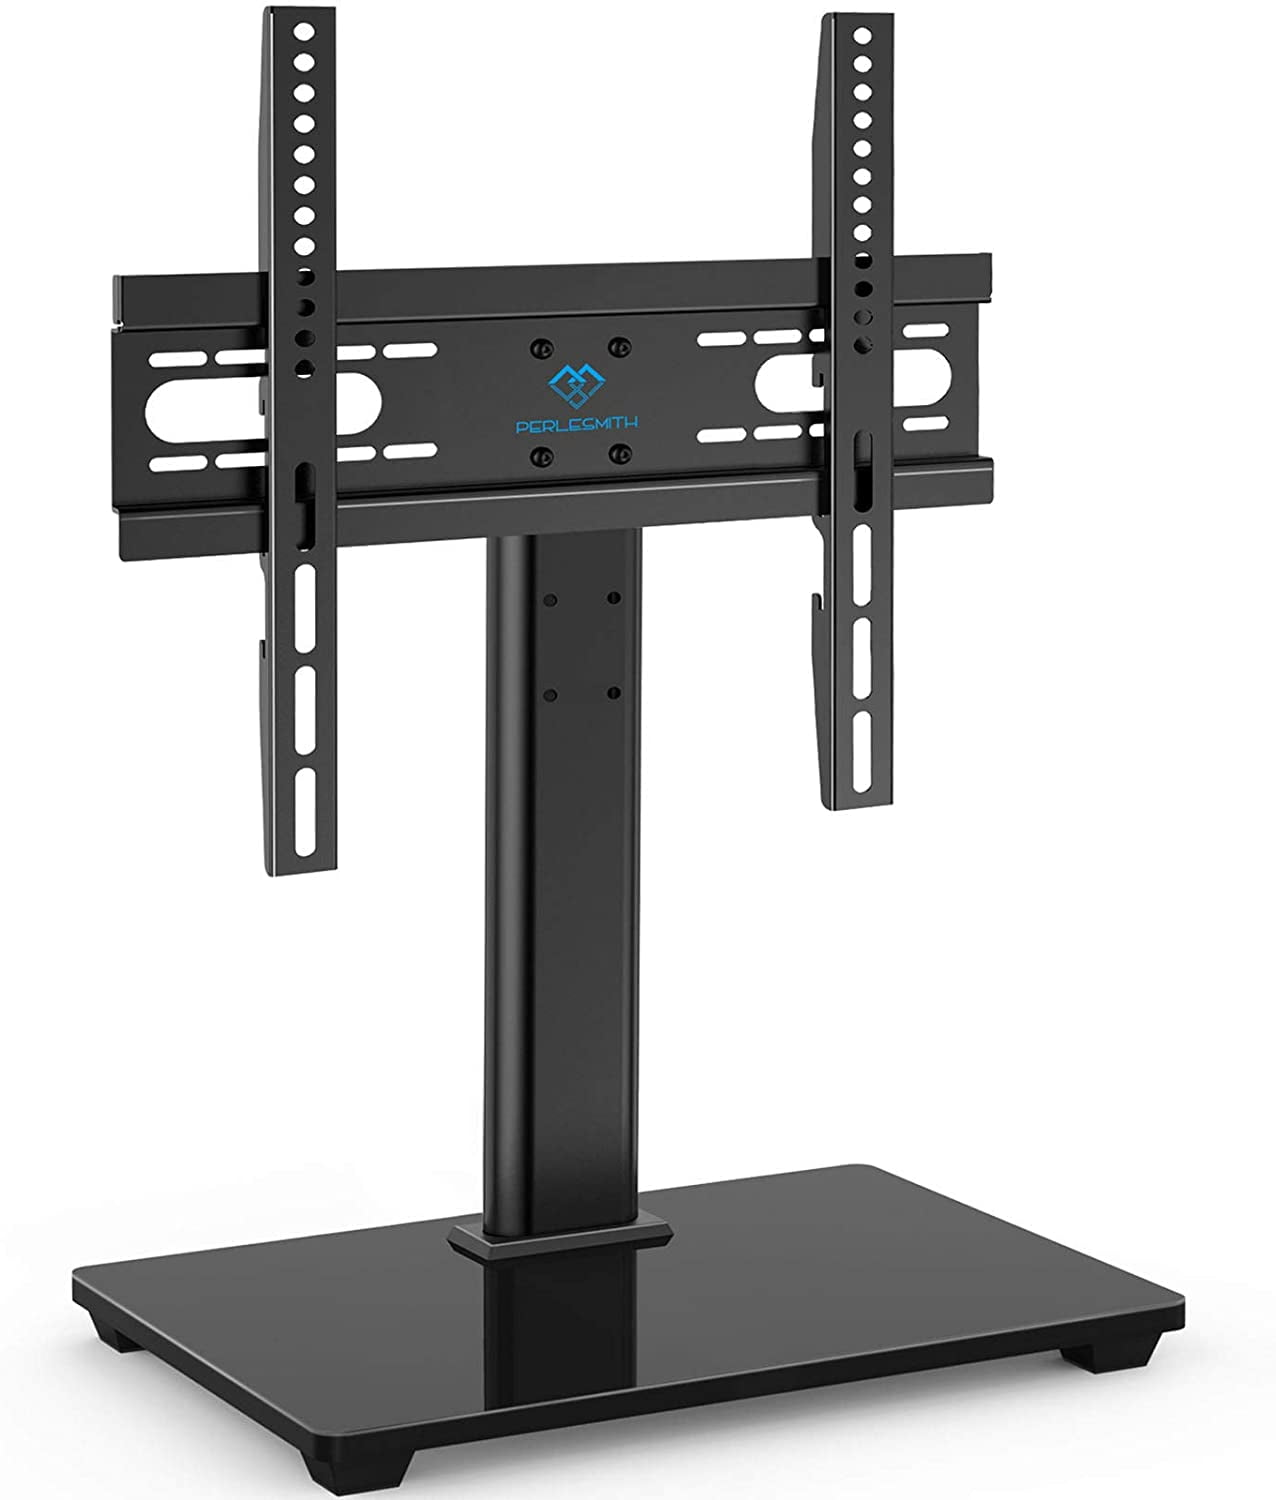 Max VESA 400x400mm Universal TV Stand TV Base Stand Holds up to 88 lbs Height Adjustable TV Mount Stand with Tempered Glass Base Table Top TV Stand with Mount for 37-55 Inch Flat Screen TVs 